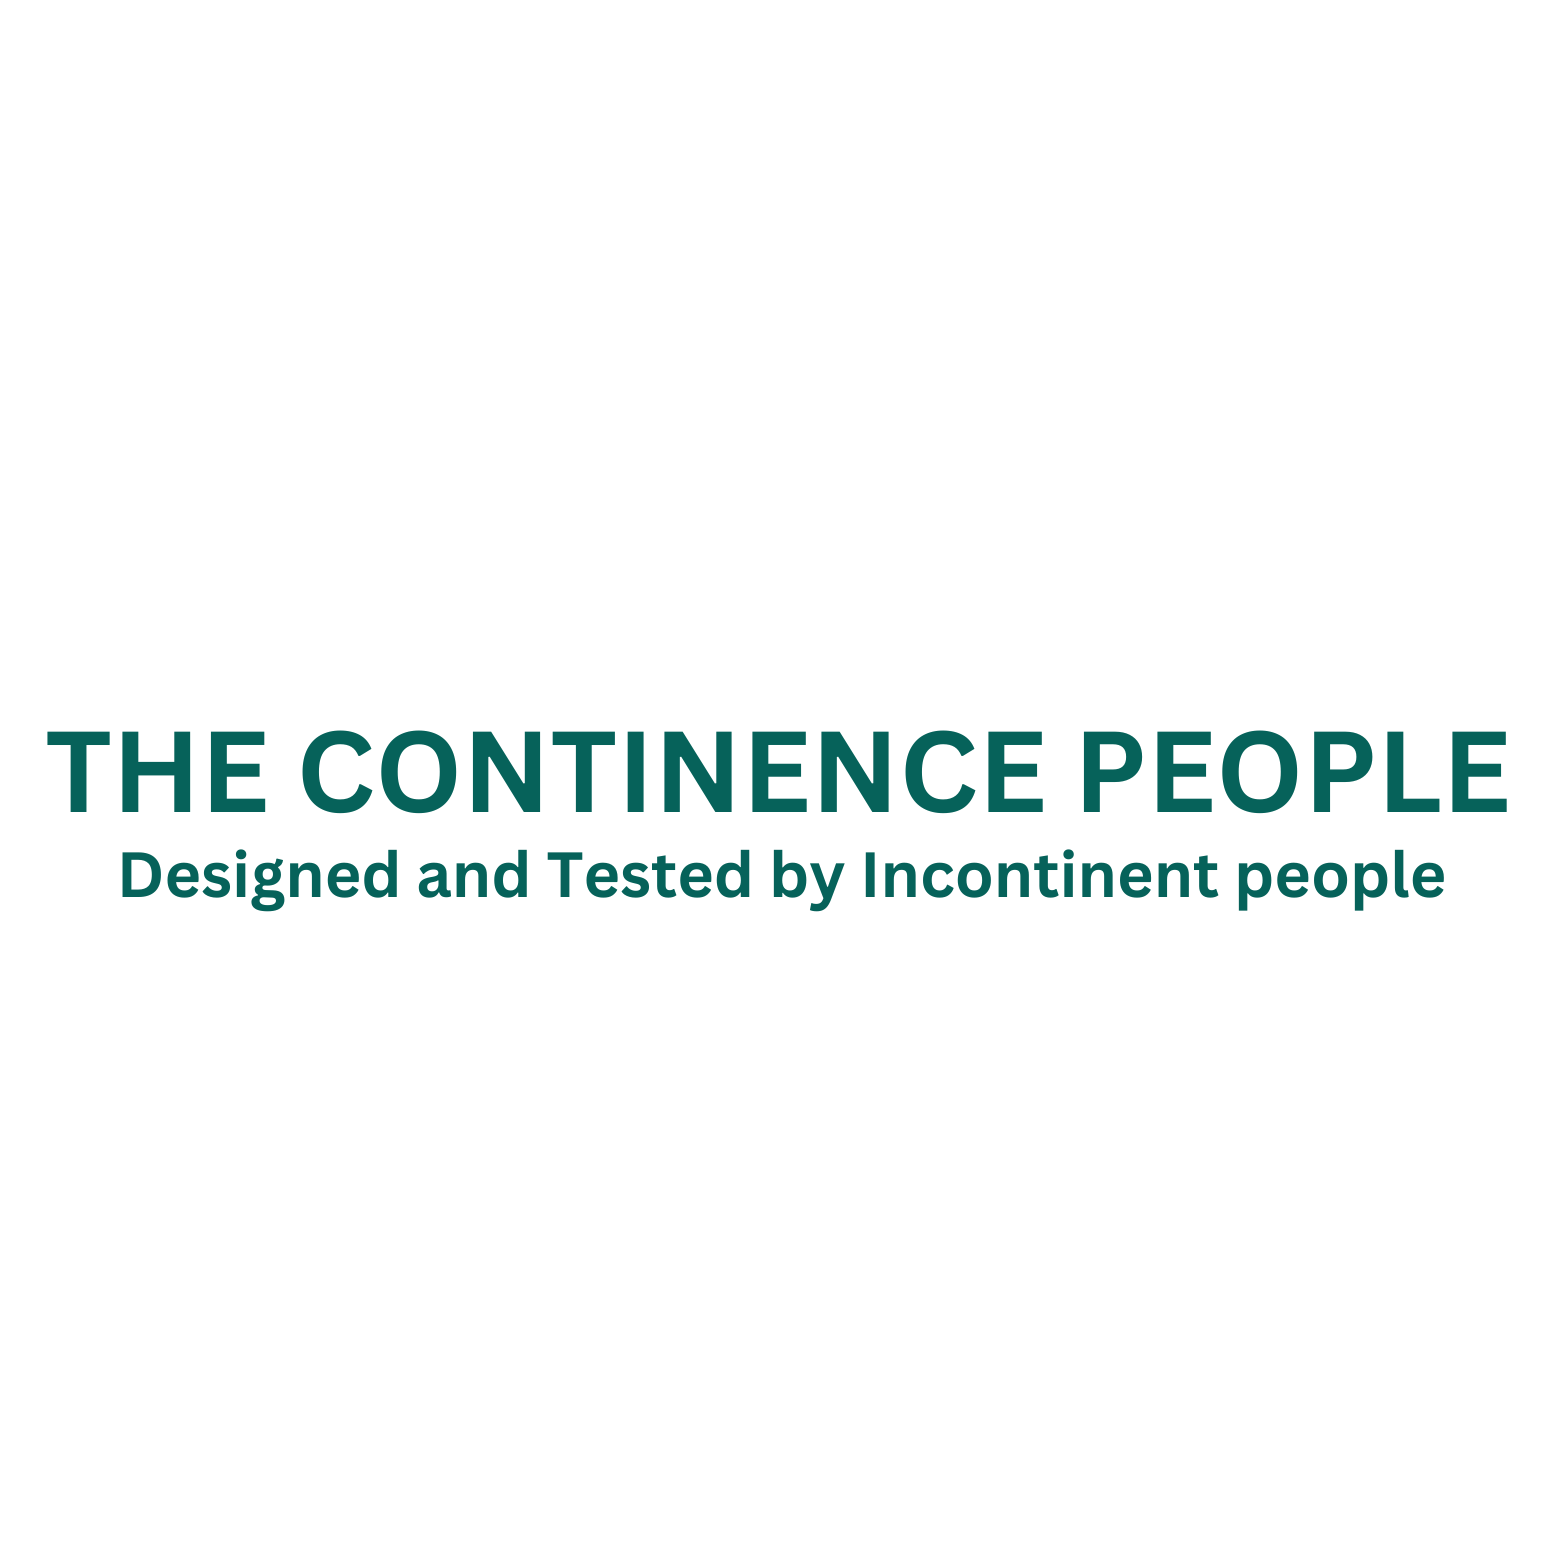 The Continence People